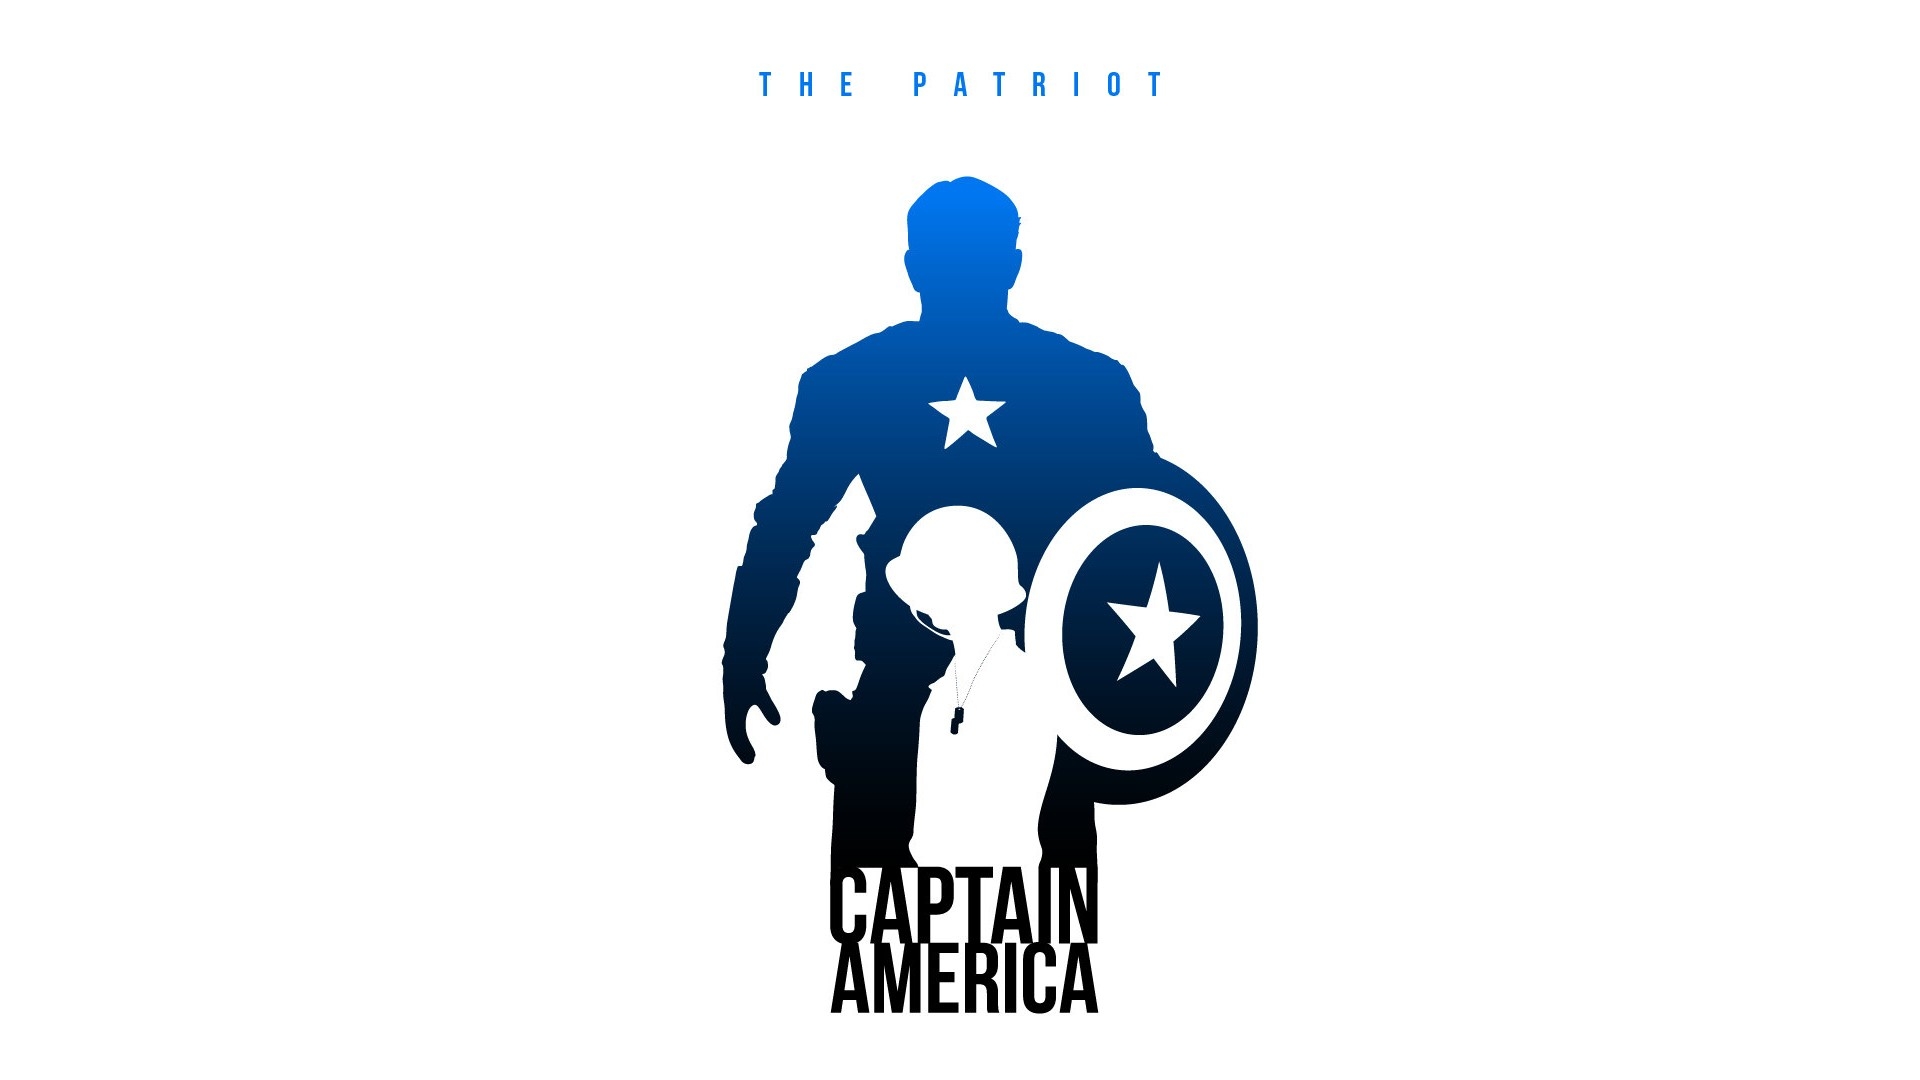 Wallpapers Captain America the Patriot comic book on the desktop